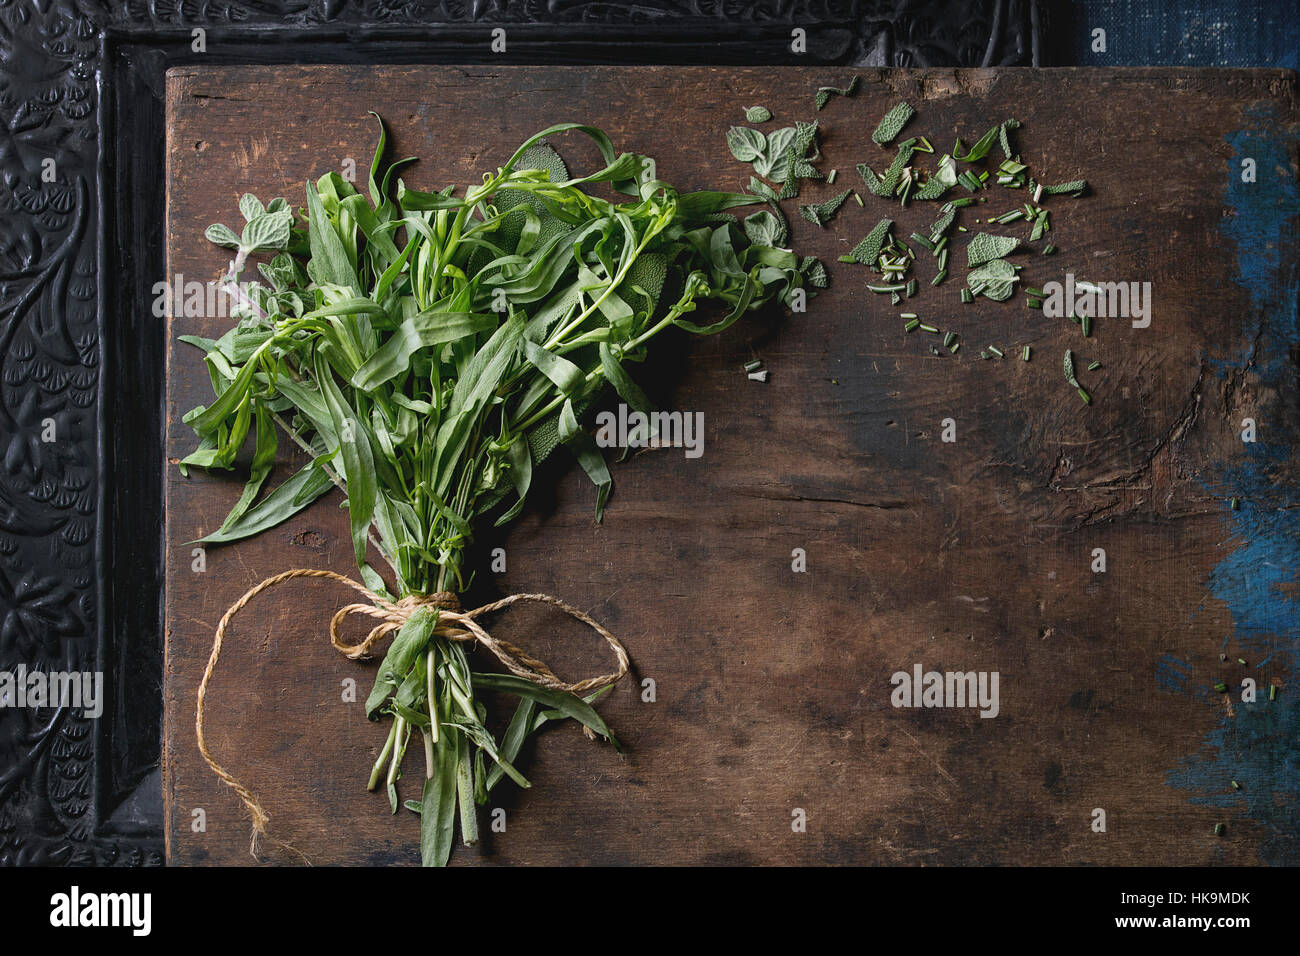 Bundle of fresh and cutting Italian herbs rosemary, oregano and sage over old dark wooden and black ornate background. Top view with copy space Stock Photo